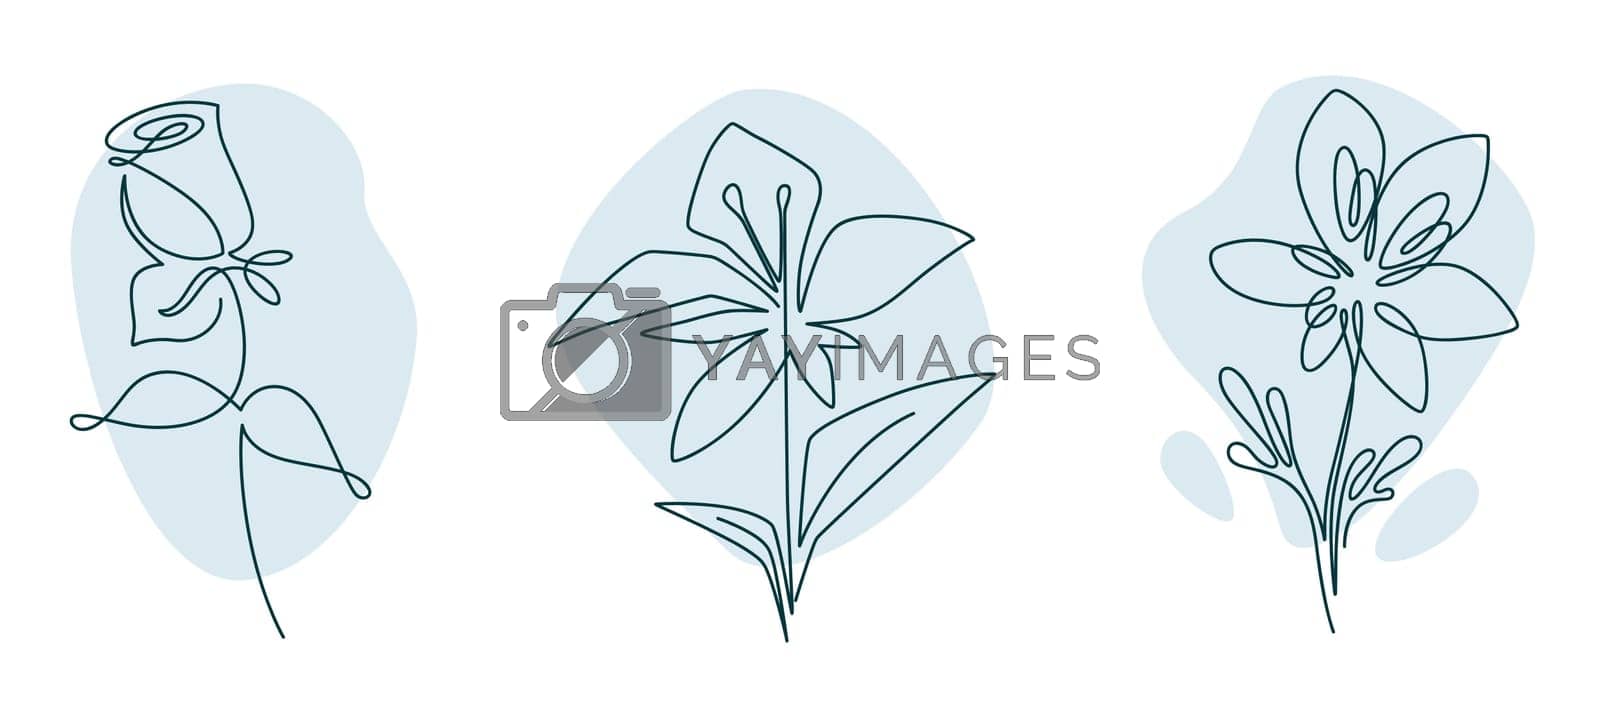 Royalty free image of Minimalist flowers in blossom drawing vectors by Sonulkaster